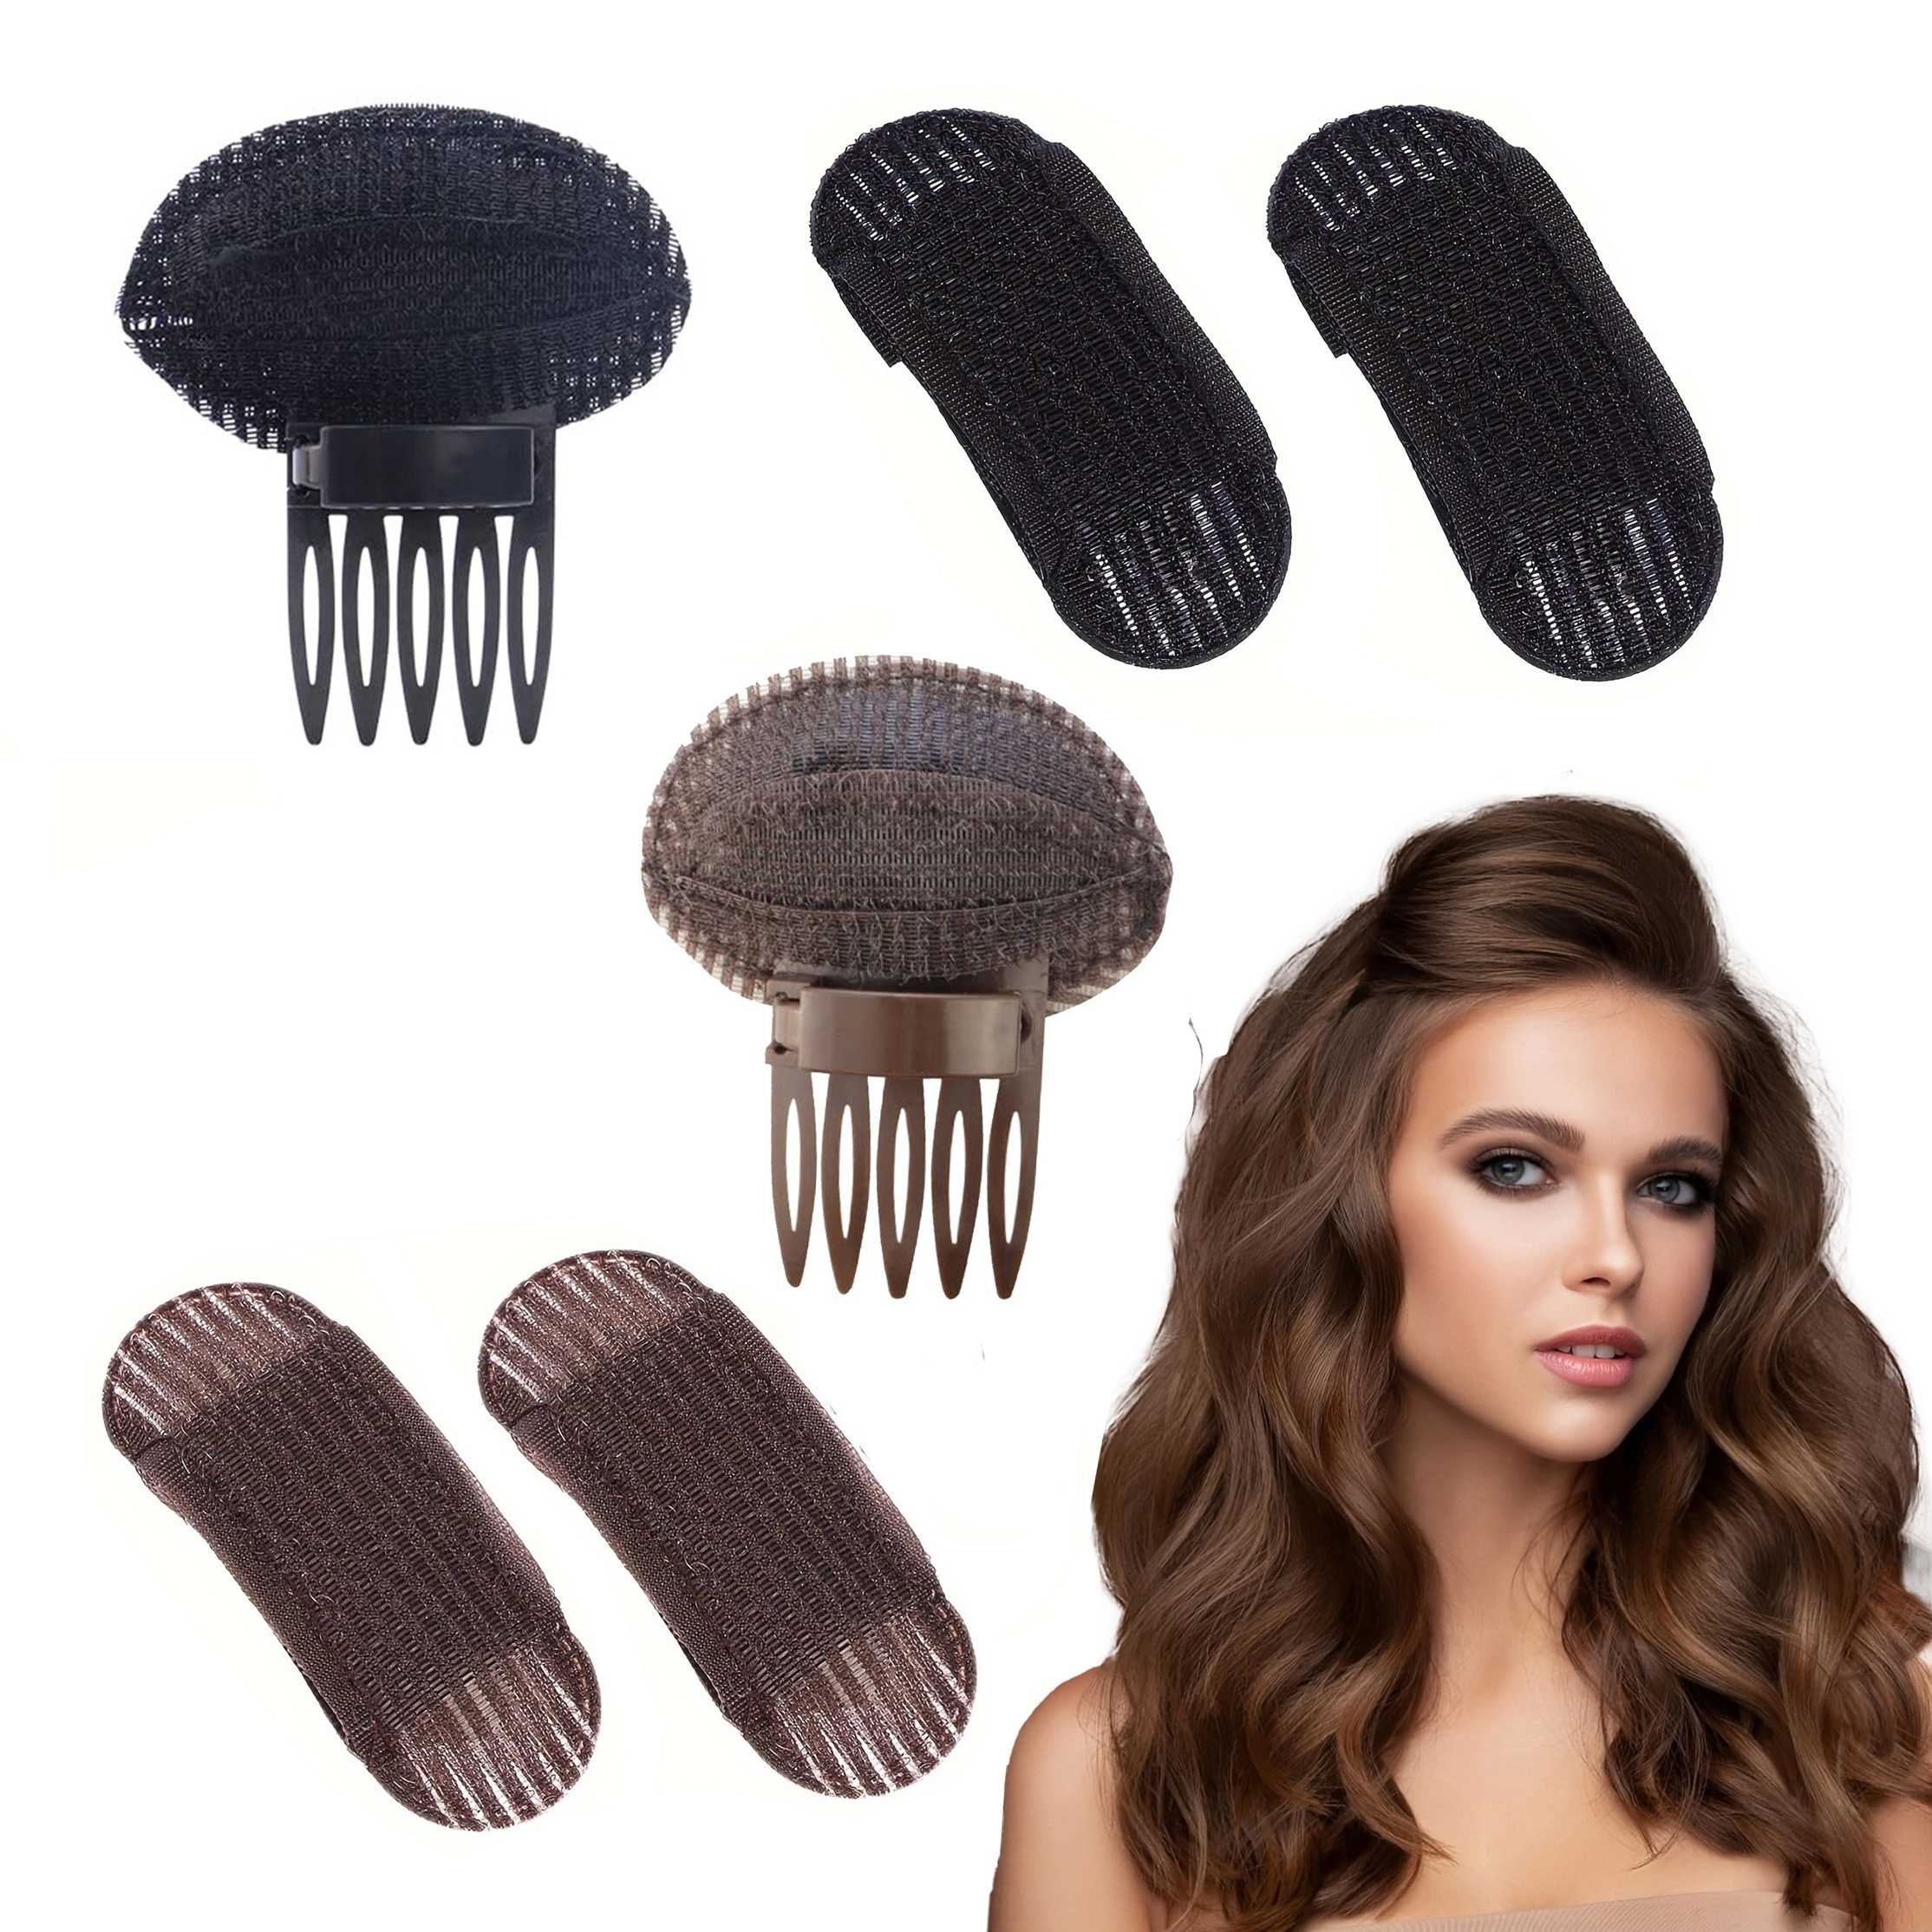 

3pcs/set Invisible Fluffy Hair Clips Volumizing Hair Root Clips Diy Hair Styling Accessories For Women And Daily Uses